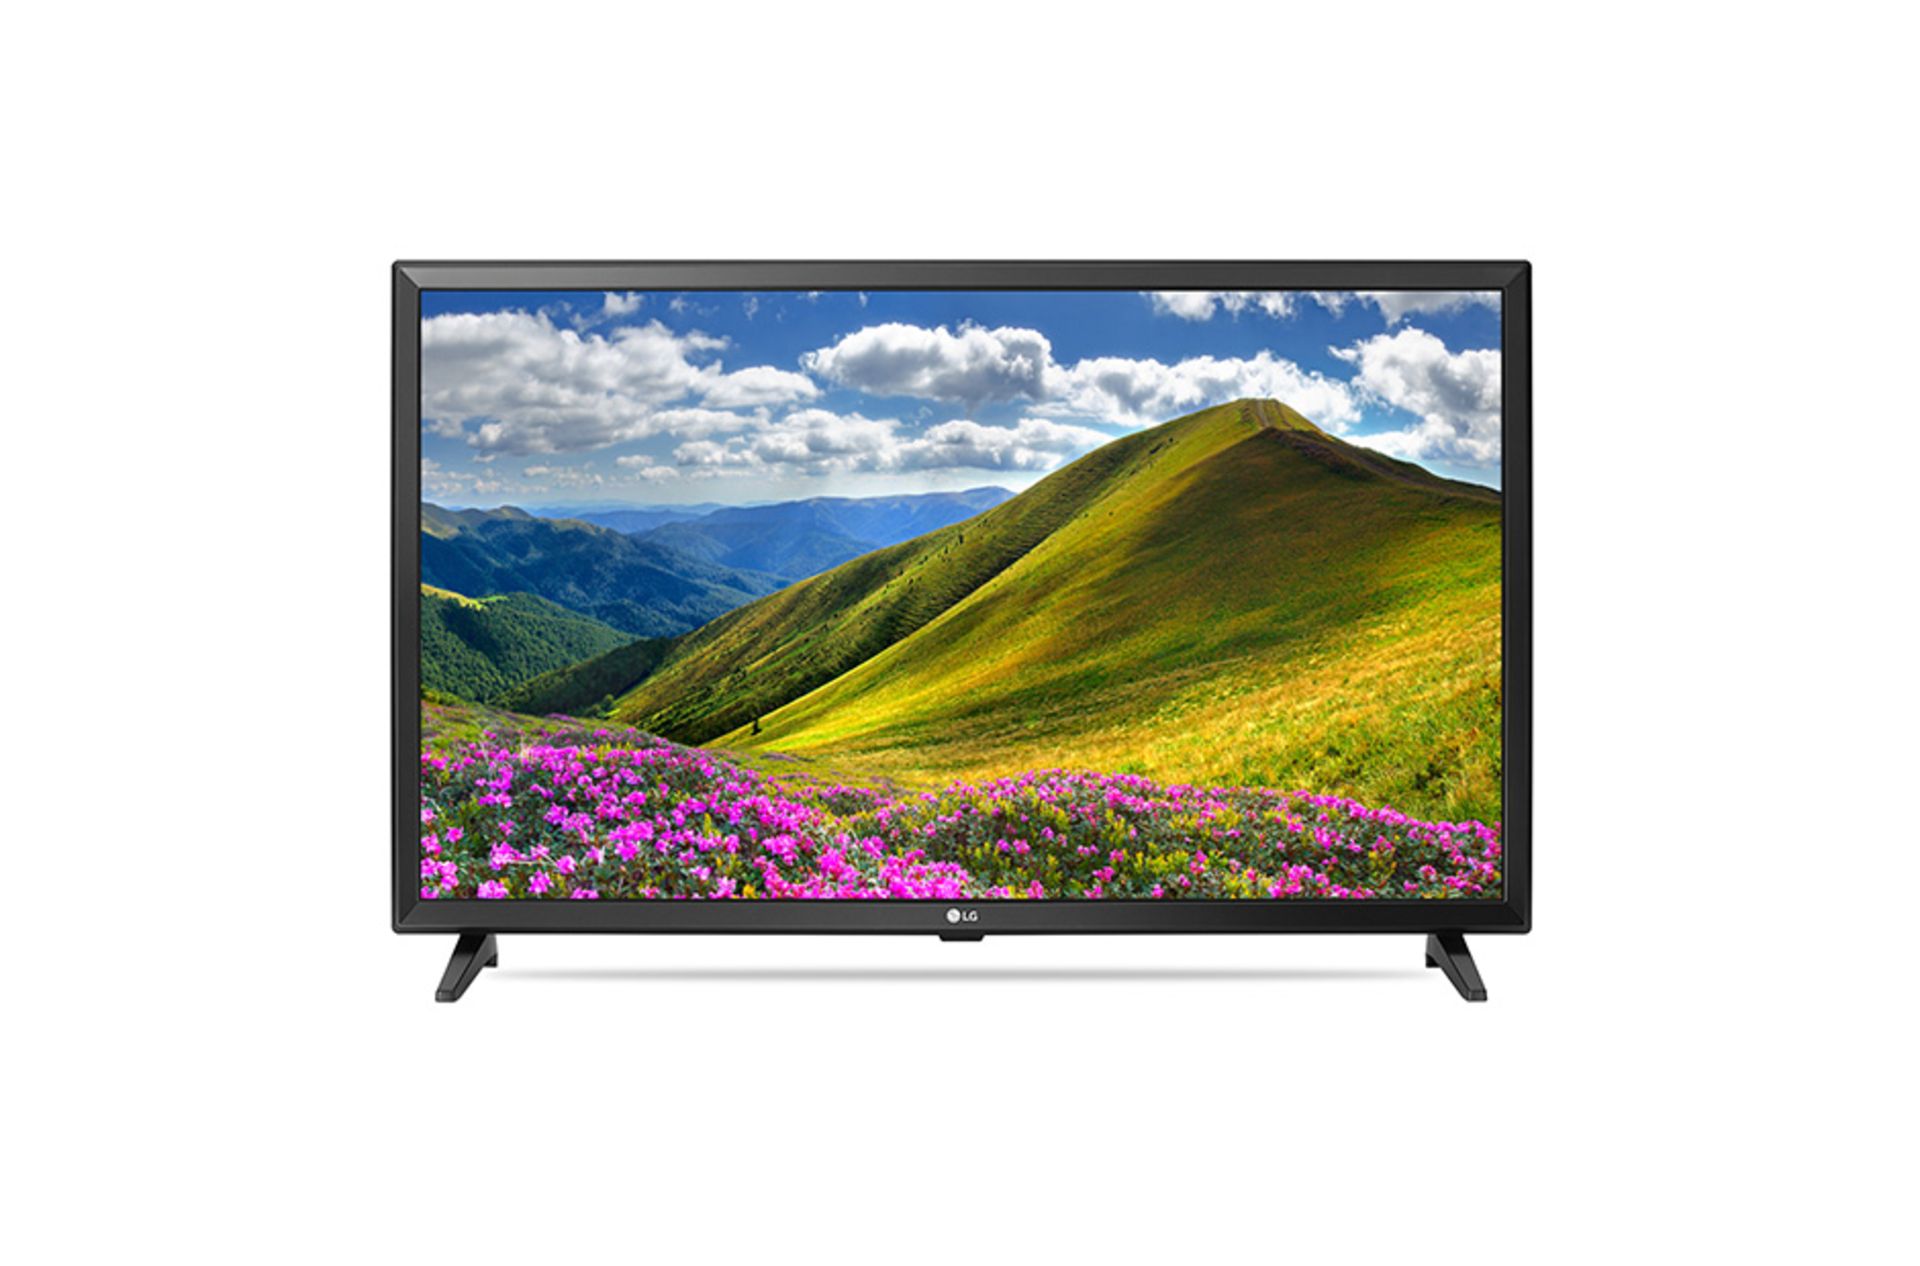 V Grade A LG 32 Inch HD READY LED TV WITH FREEVIEW 32LJ510B